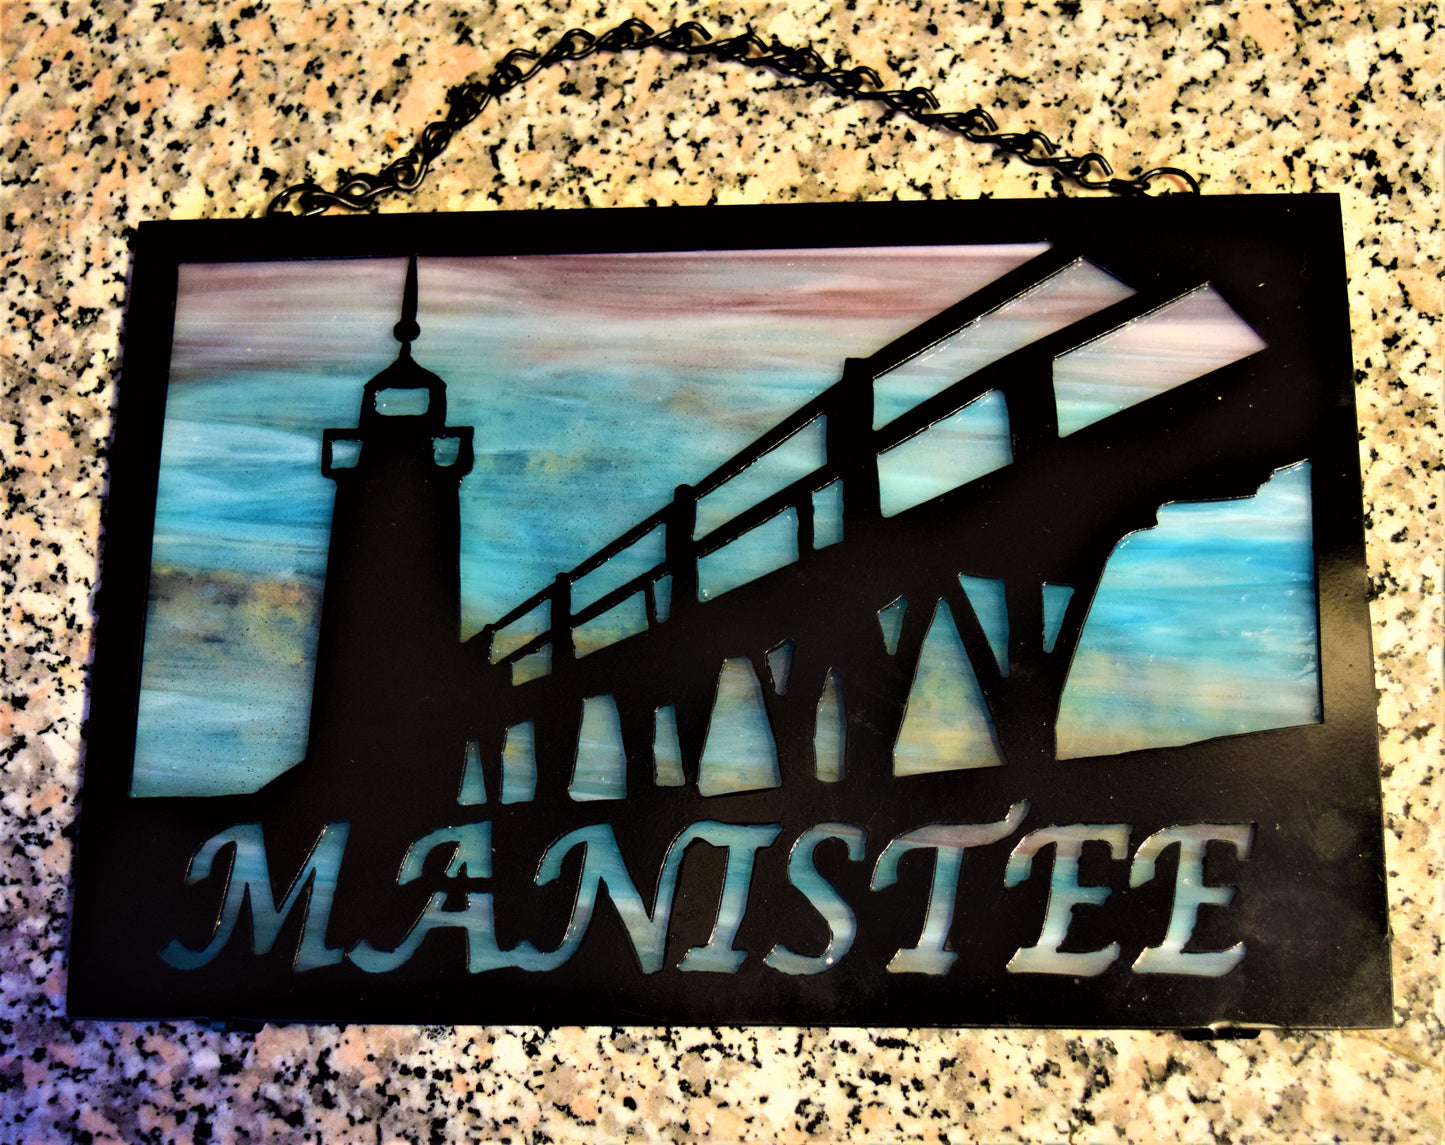 Black custom metal featuring Manistee Michigan lighthouse with Manistee spelled out beneath lighthouse image. With purple and blue beneath metal 